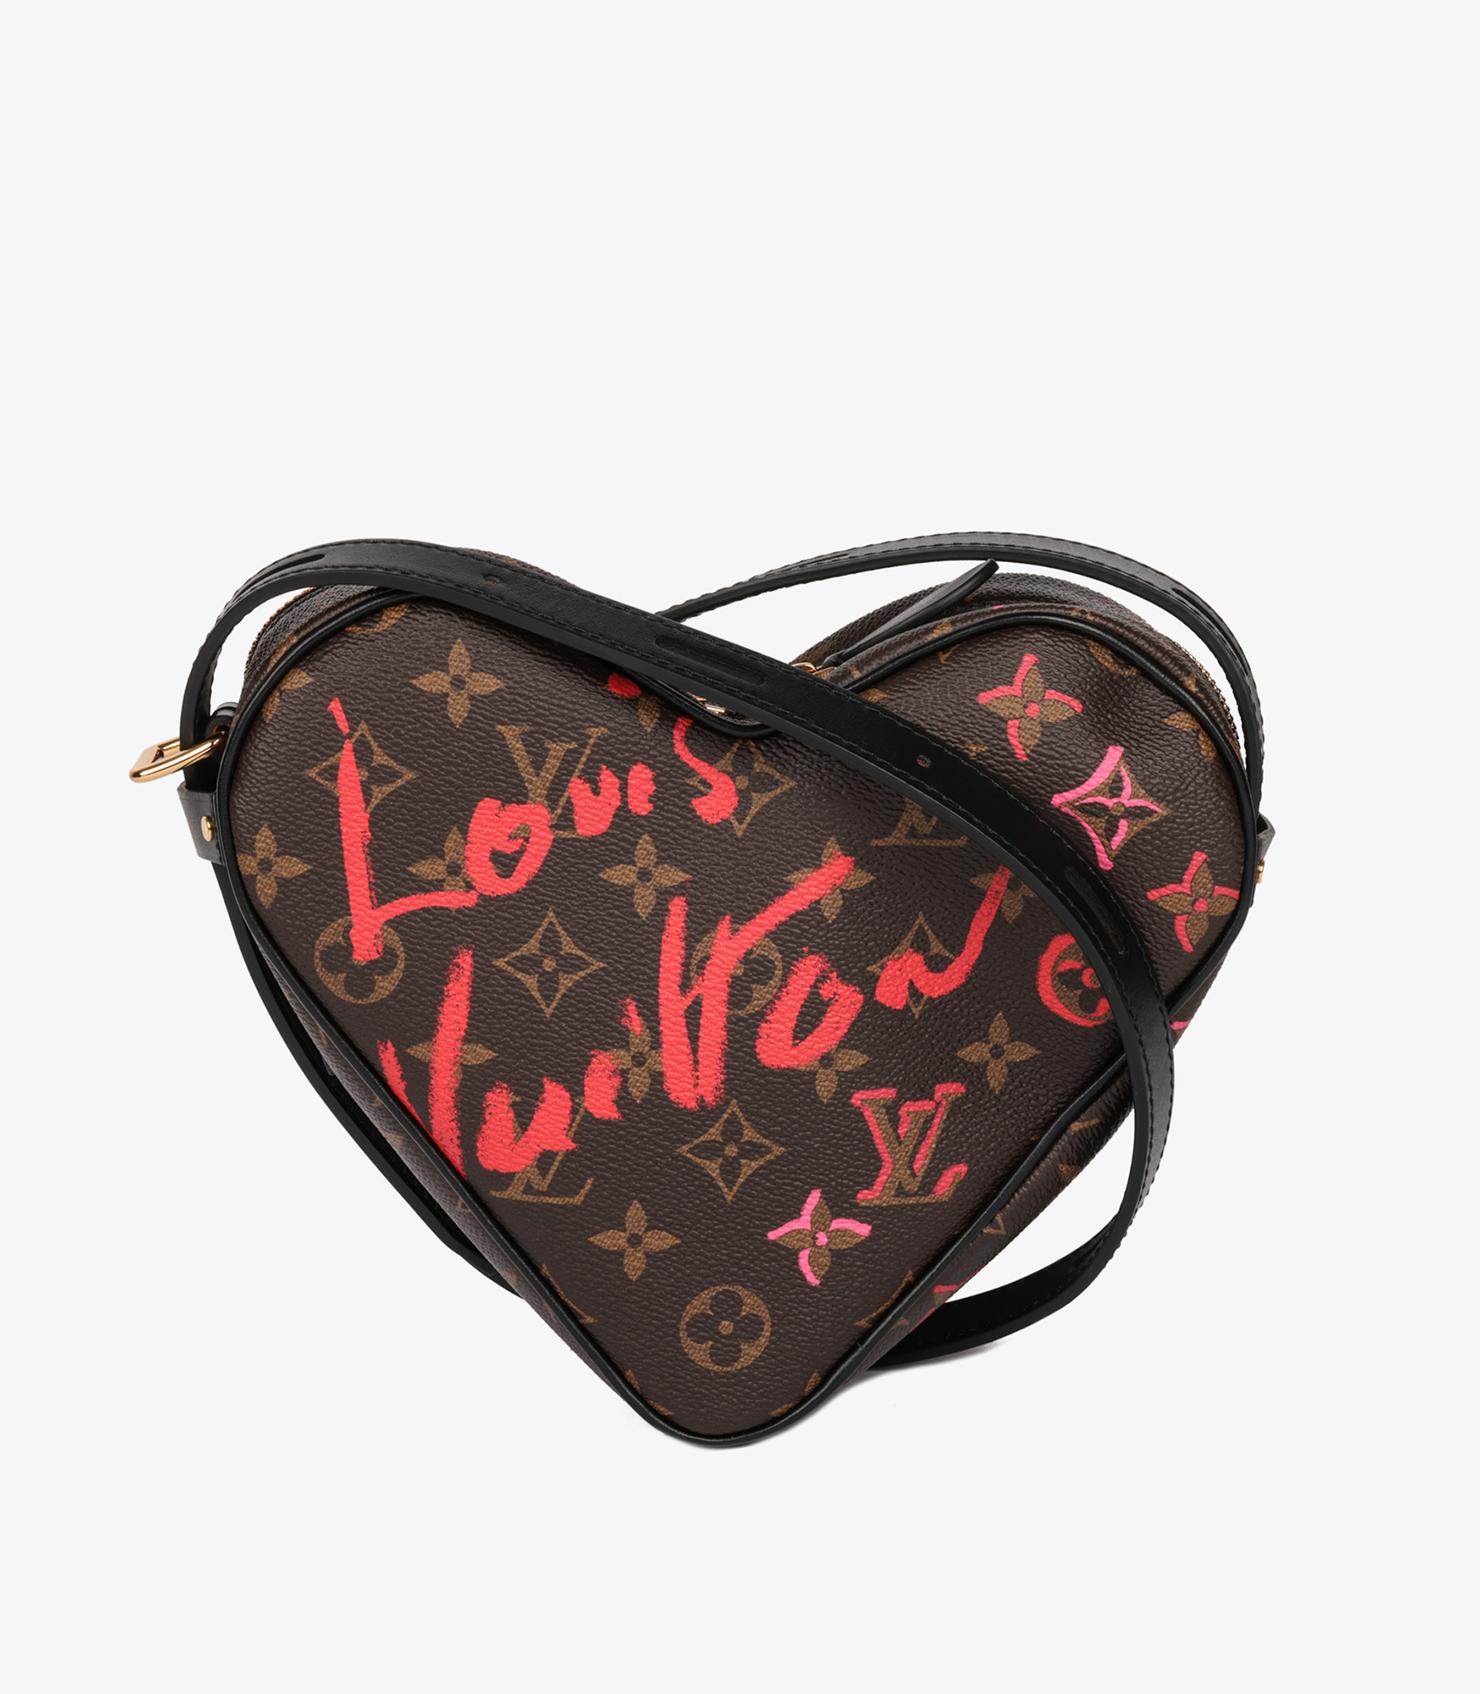 Louis Vuitton Brown Monogram Coated Canvas & Black Coated Canvas Sac Coeur

Brand- Louis Vuitton
Model- Sac Coeur
Product Type- Crossbody, Shoulder
Serial Number- X
Age- Circa 2021
Accompanied By- Louis Vuitton Dust Bag
Colour- Brown
Hardware-